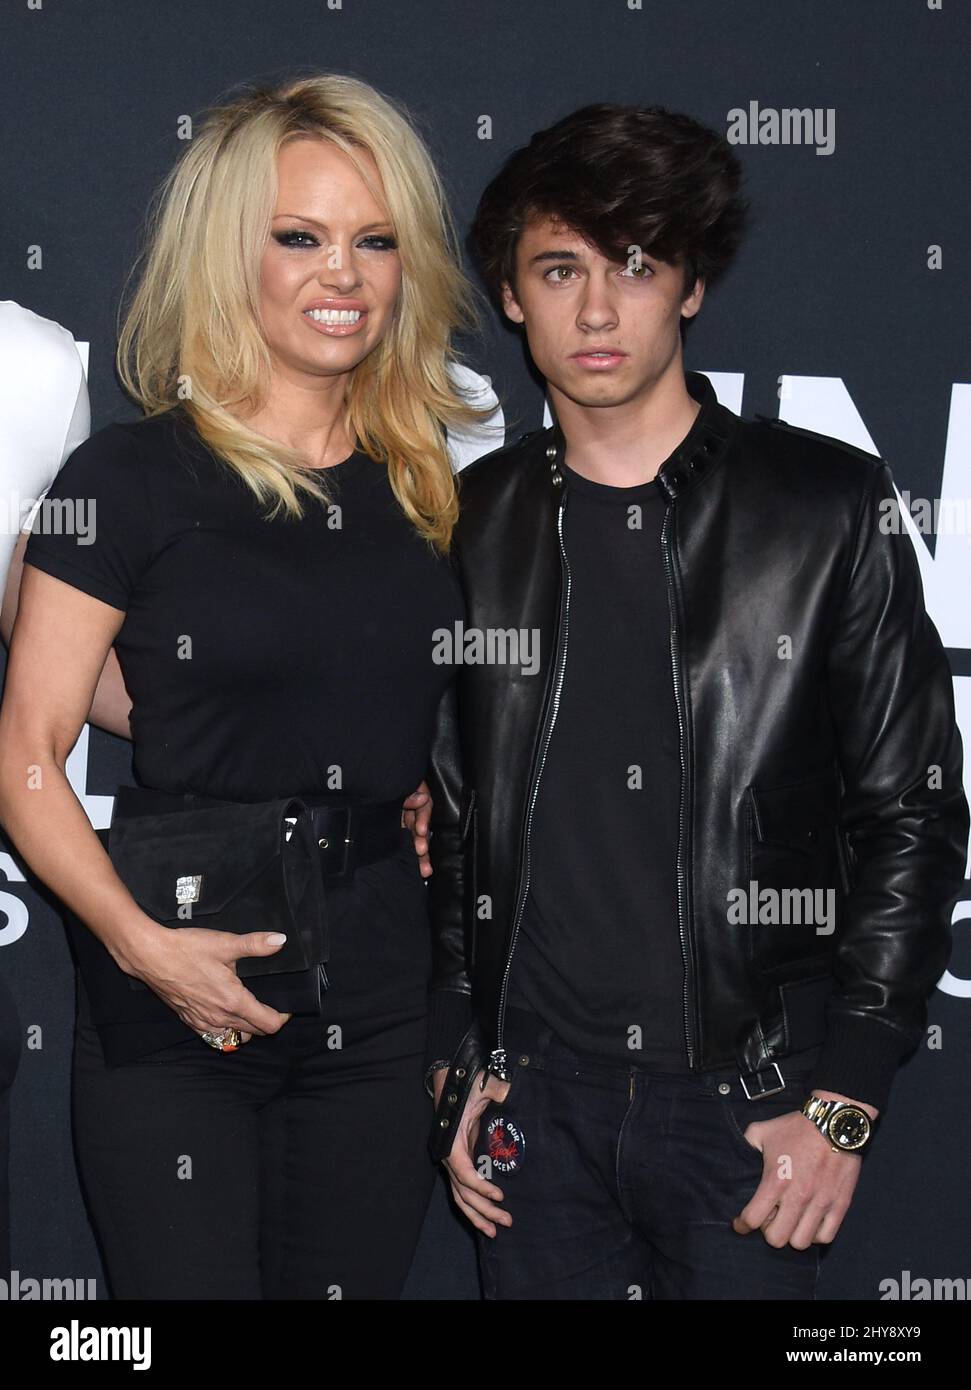 Brandon Thomas Lee, Pamela Anderson and Dylan Jagger Lee attending the  Saint Laurent event held at the Hollywood Palladium in Los Angeles,  California Stock Photo - Alamy